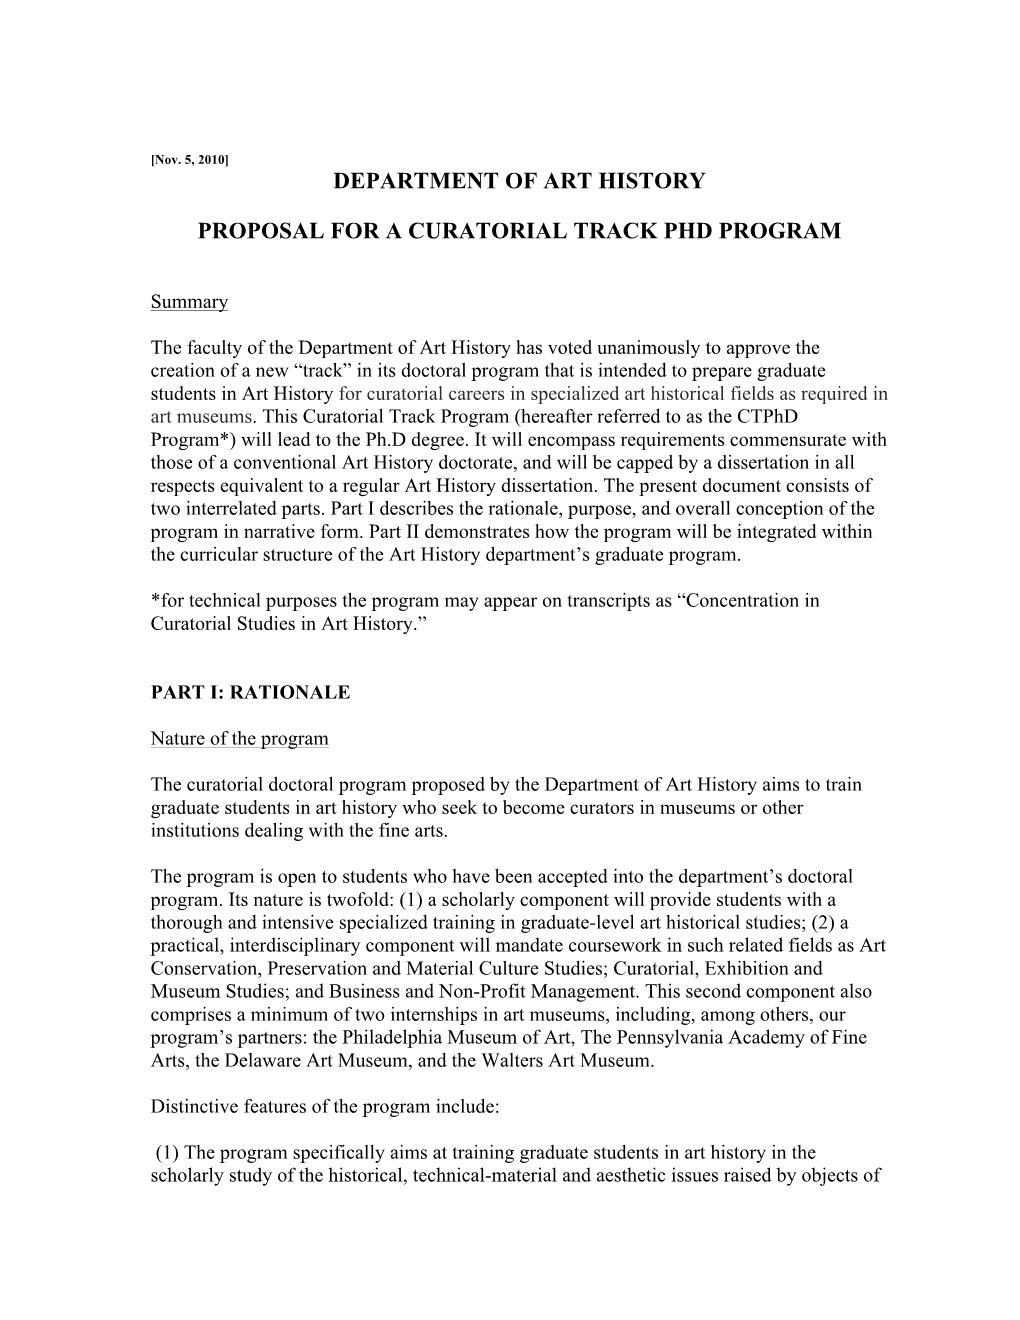 Department of Art History Proposal for a Curatorial Track Phd Program